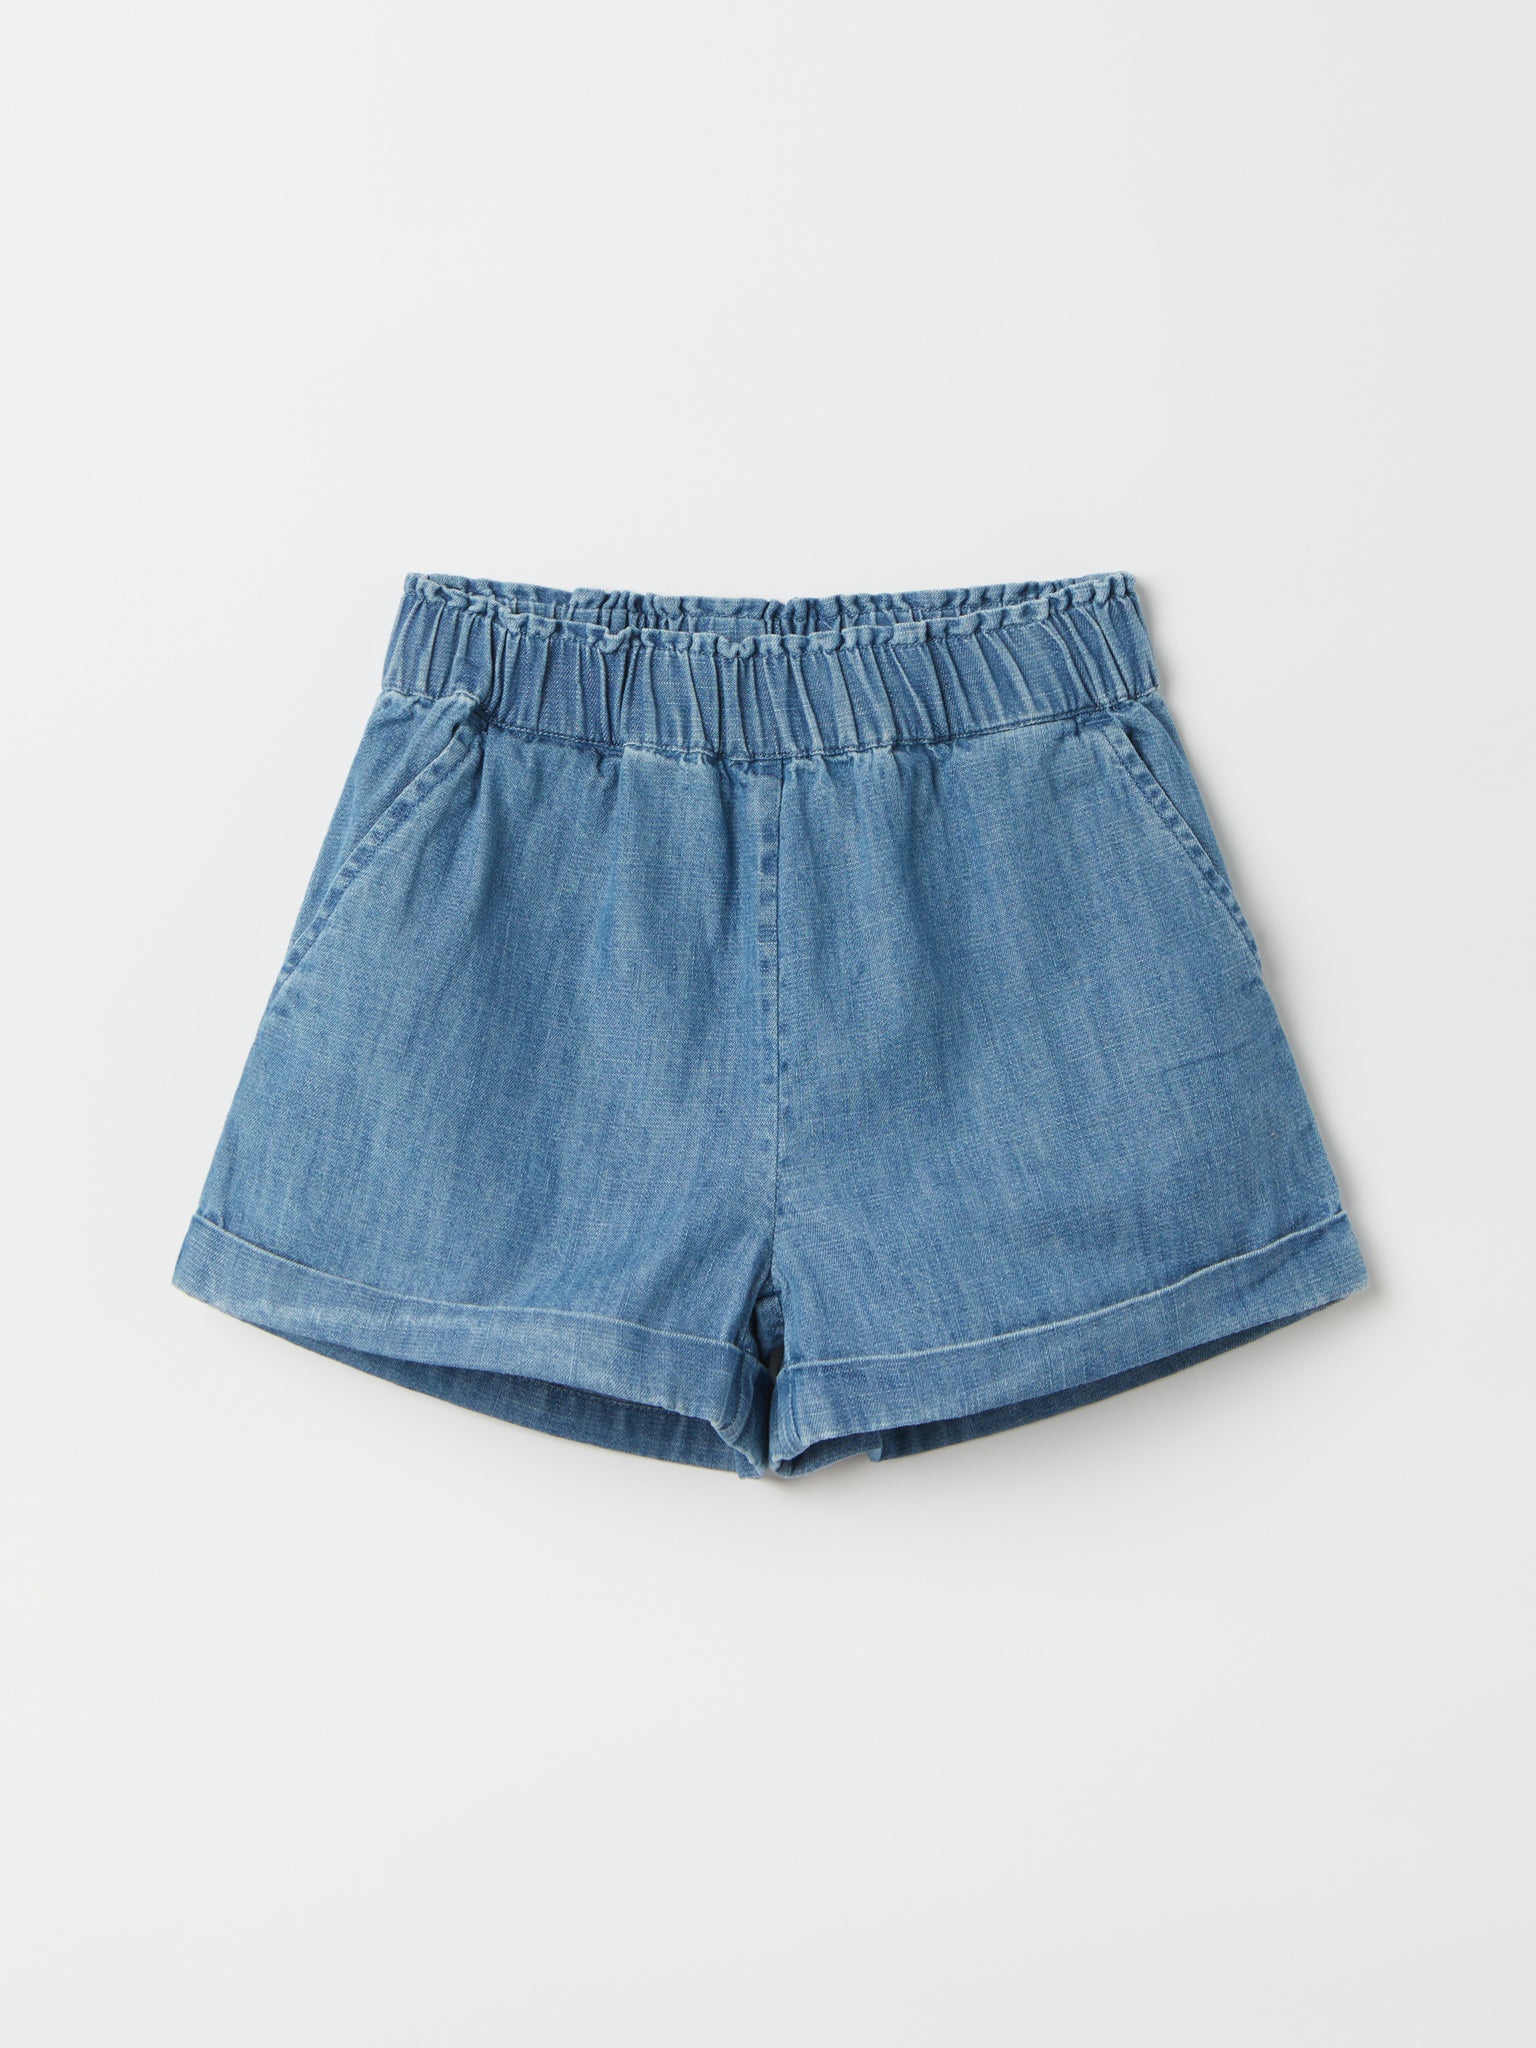 Cotton Denim Chambray Kids Shorts from the Polarn O. Pyret kidswear collection. Ethically produced kids clothing.